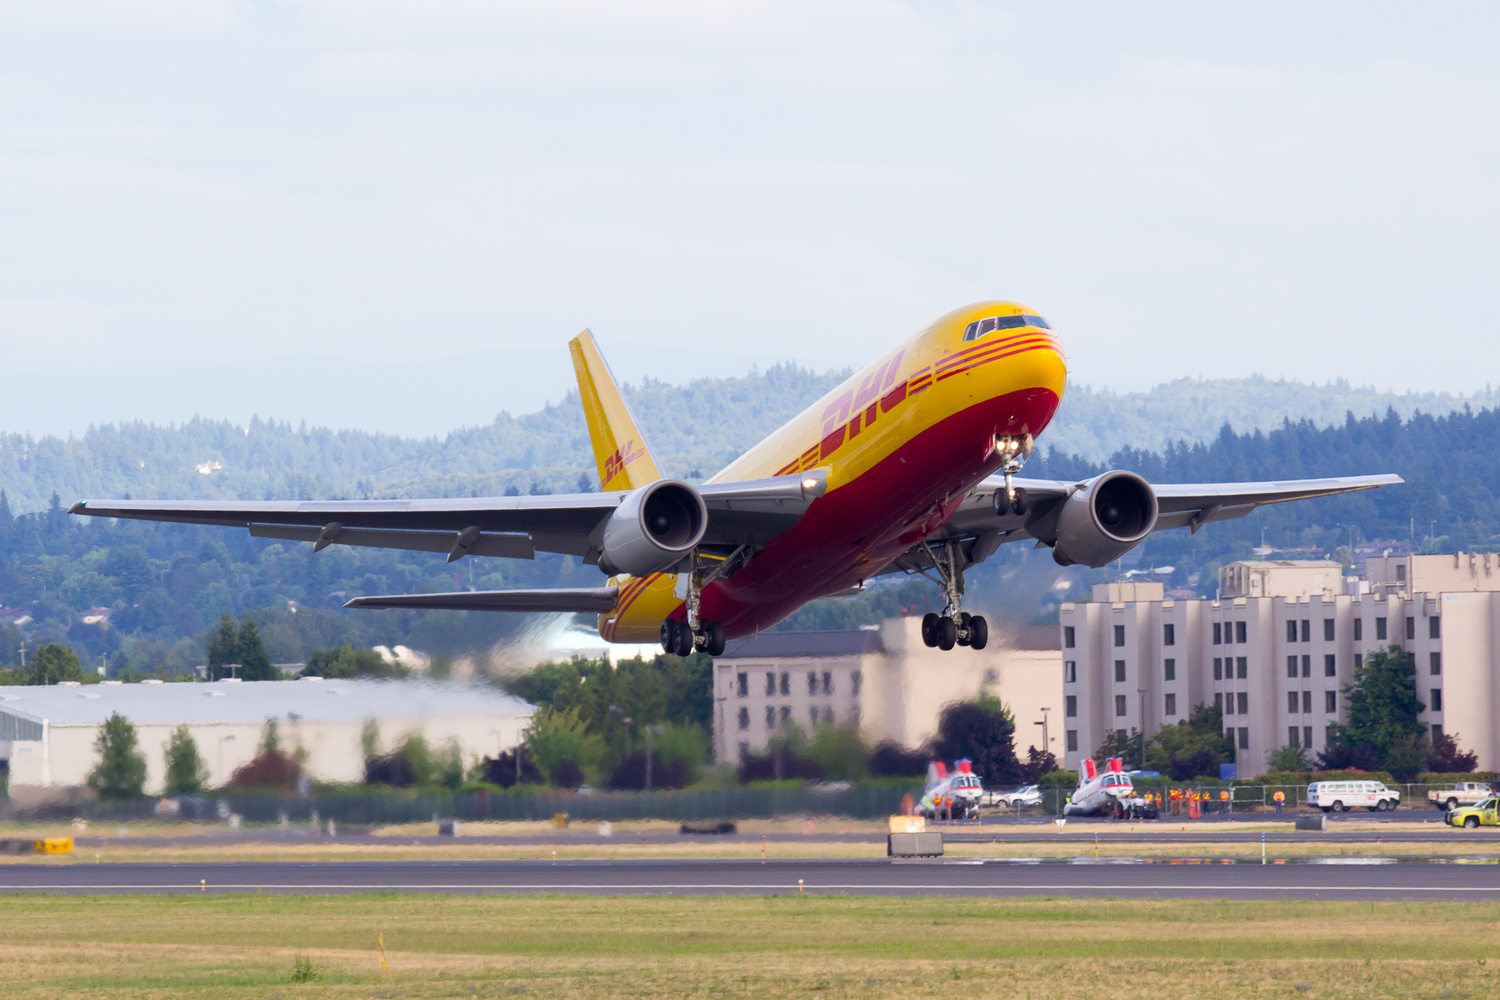 N785AX, a Boeing 767-200 in the DHL livery, operated by Airborne Express, departs runway 28R at Portland International Airport (KPDX).